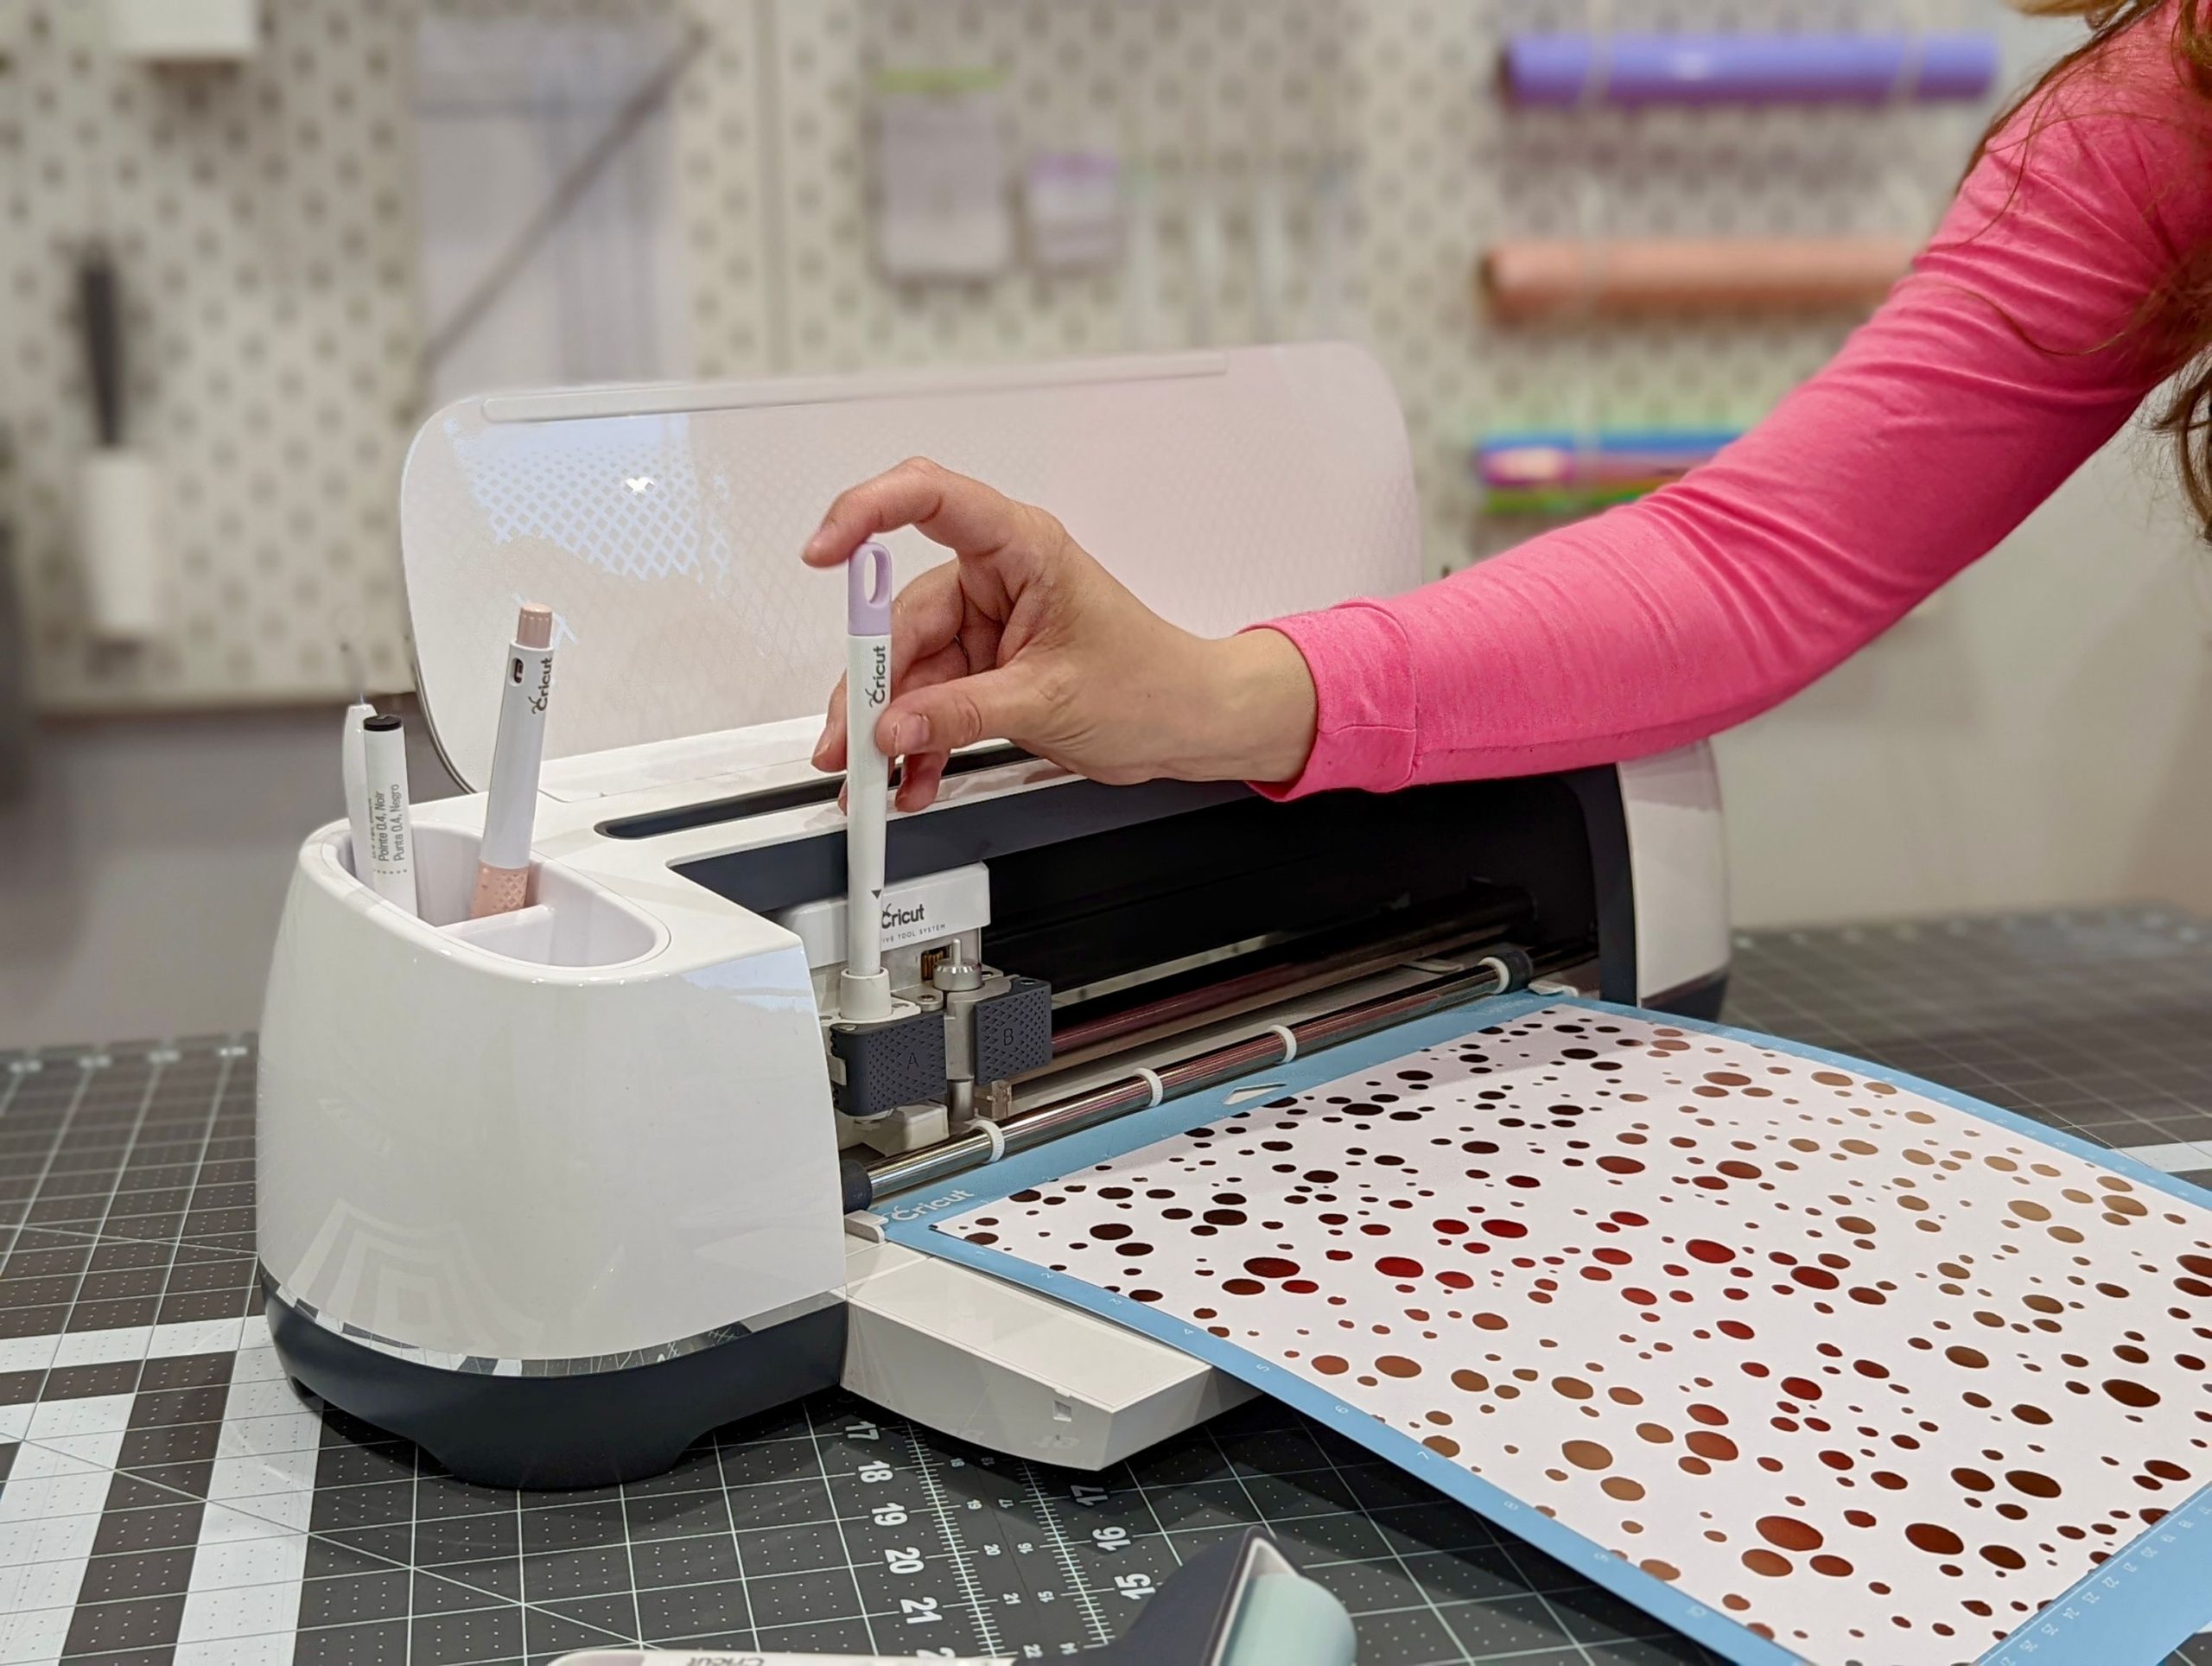 Buying in Canada: Cricut Accessory & Tools (what do you actually